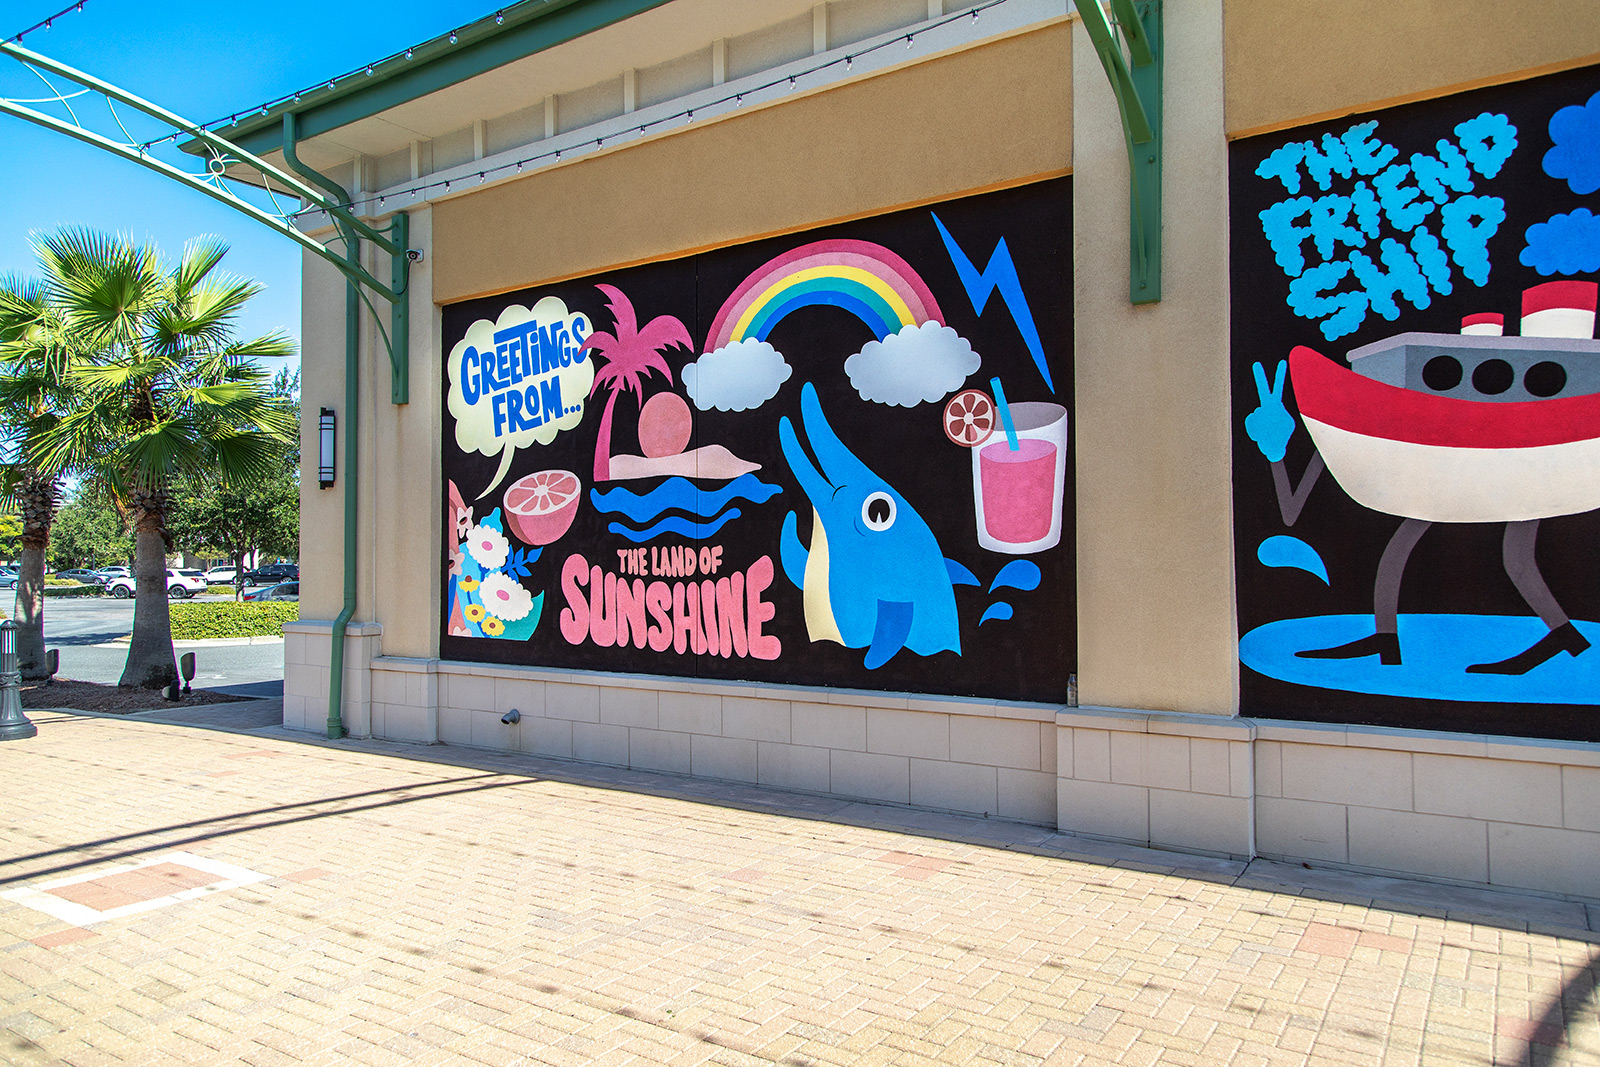 Greetings from the Land of Sunshine Mural Destin Commons